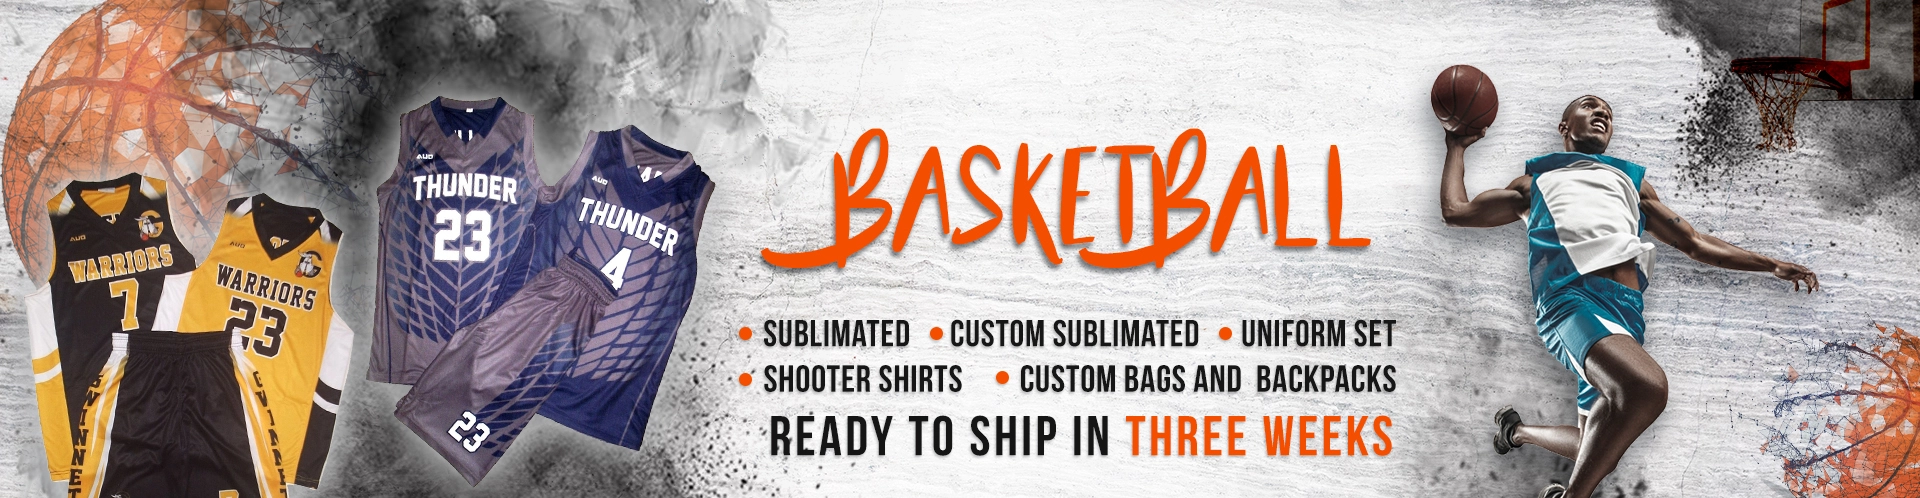 Basketball accuracy,  jerseys & caps, Add number, name, Sponsors logo,  costume sublimated,